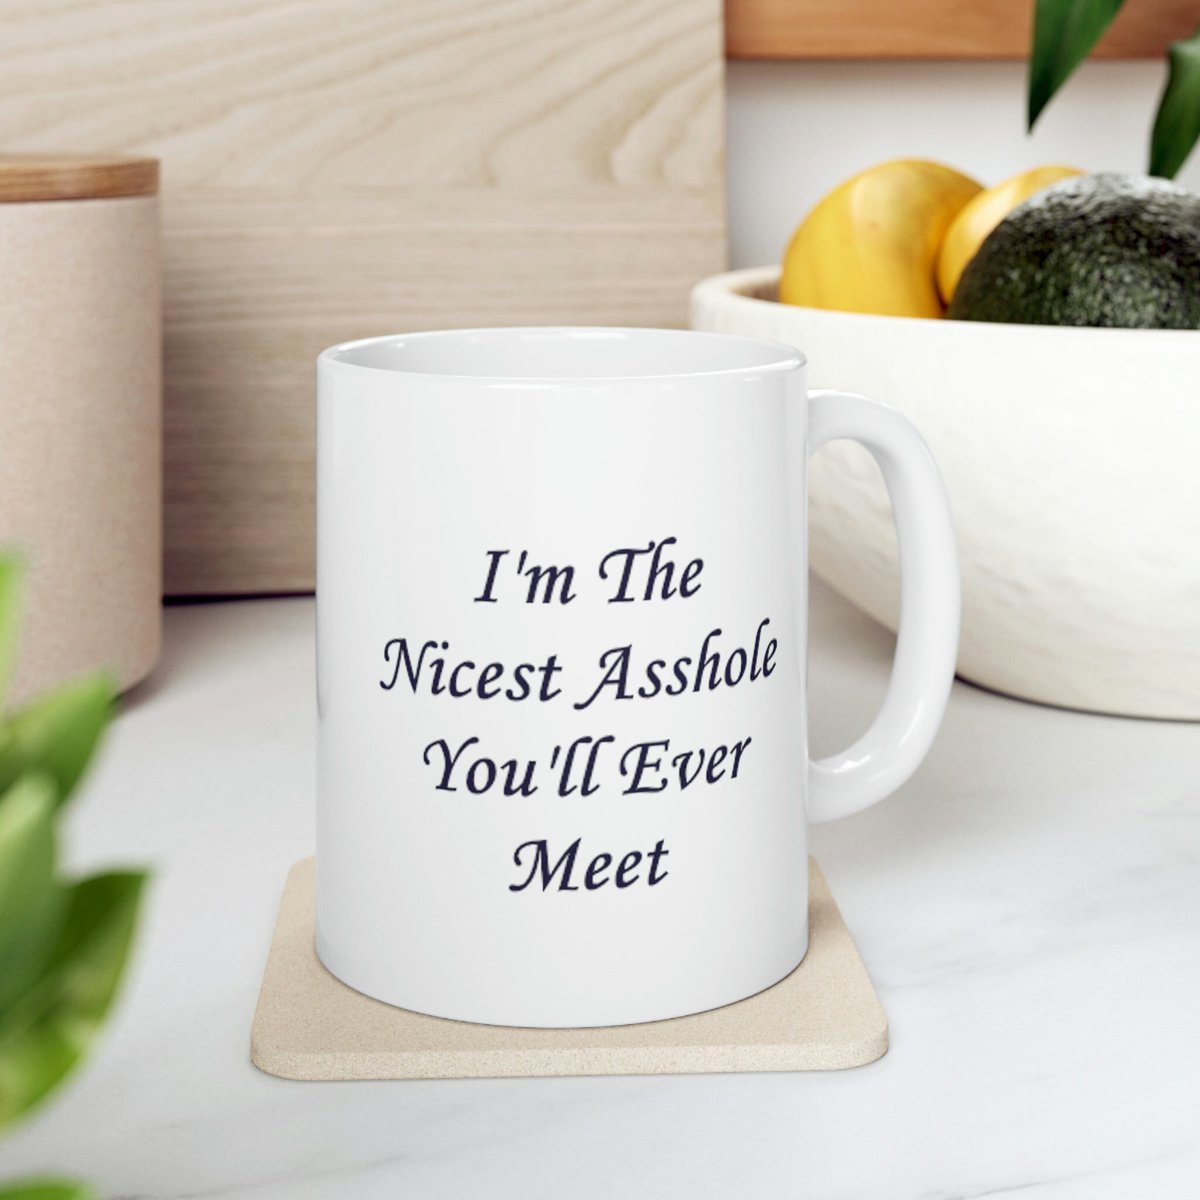 Excited to share the latest addition to my #etsy shop:  etsy.me/3phmstF #funnymug #humorousgift 
#funnymug, #humorousgift, #uniquemug, #sarcasticmug, #coffeemug, #noveltymug, #giftforfriend, #coworkergift, #giftforboss, #giftforhim #asshole